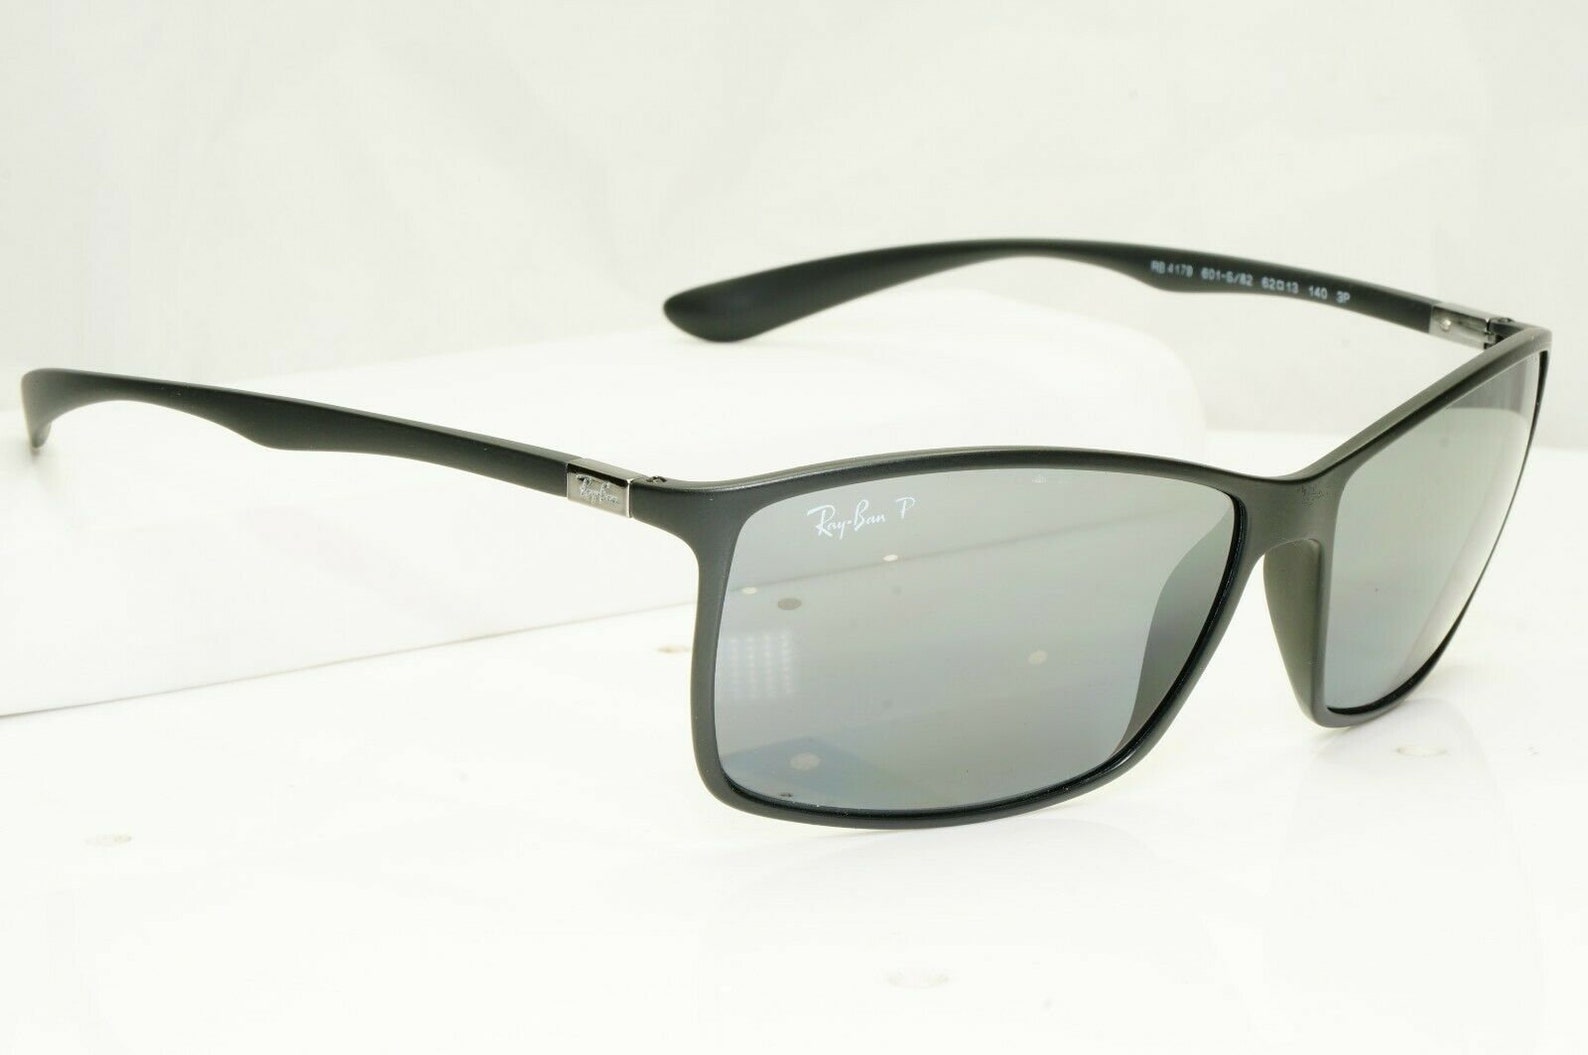 Authentic RayBan Sunglasses Polarized Black Silver Rb